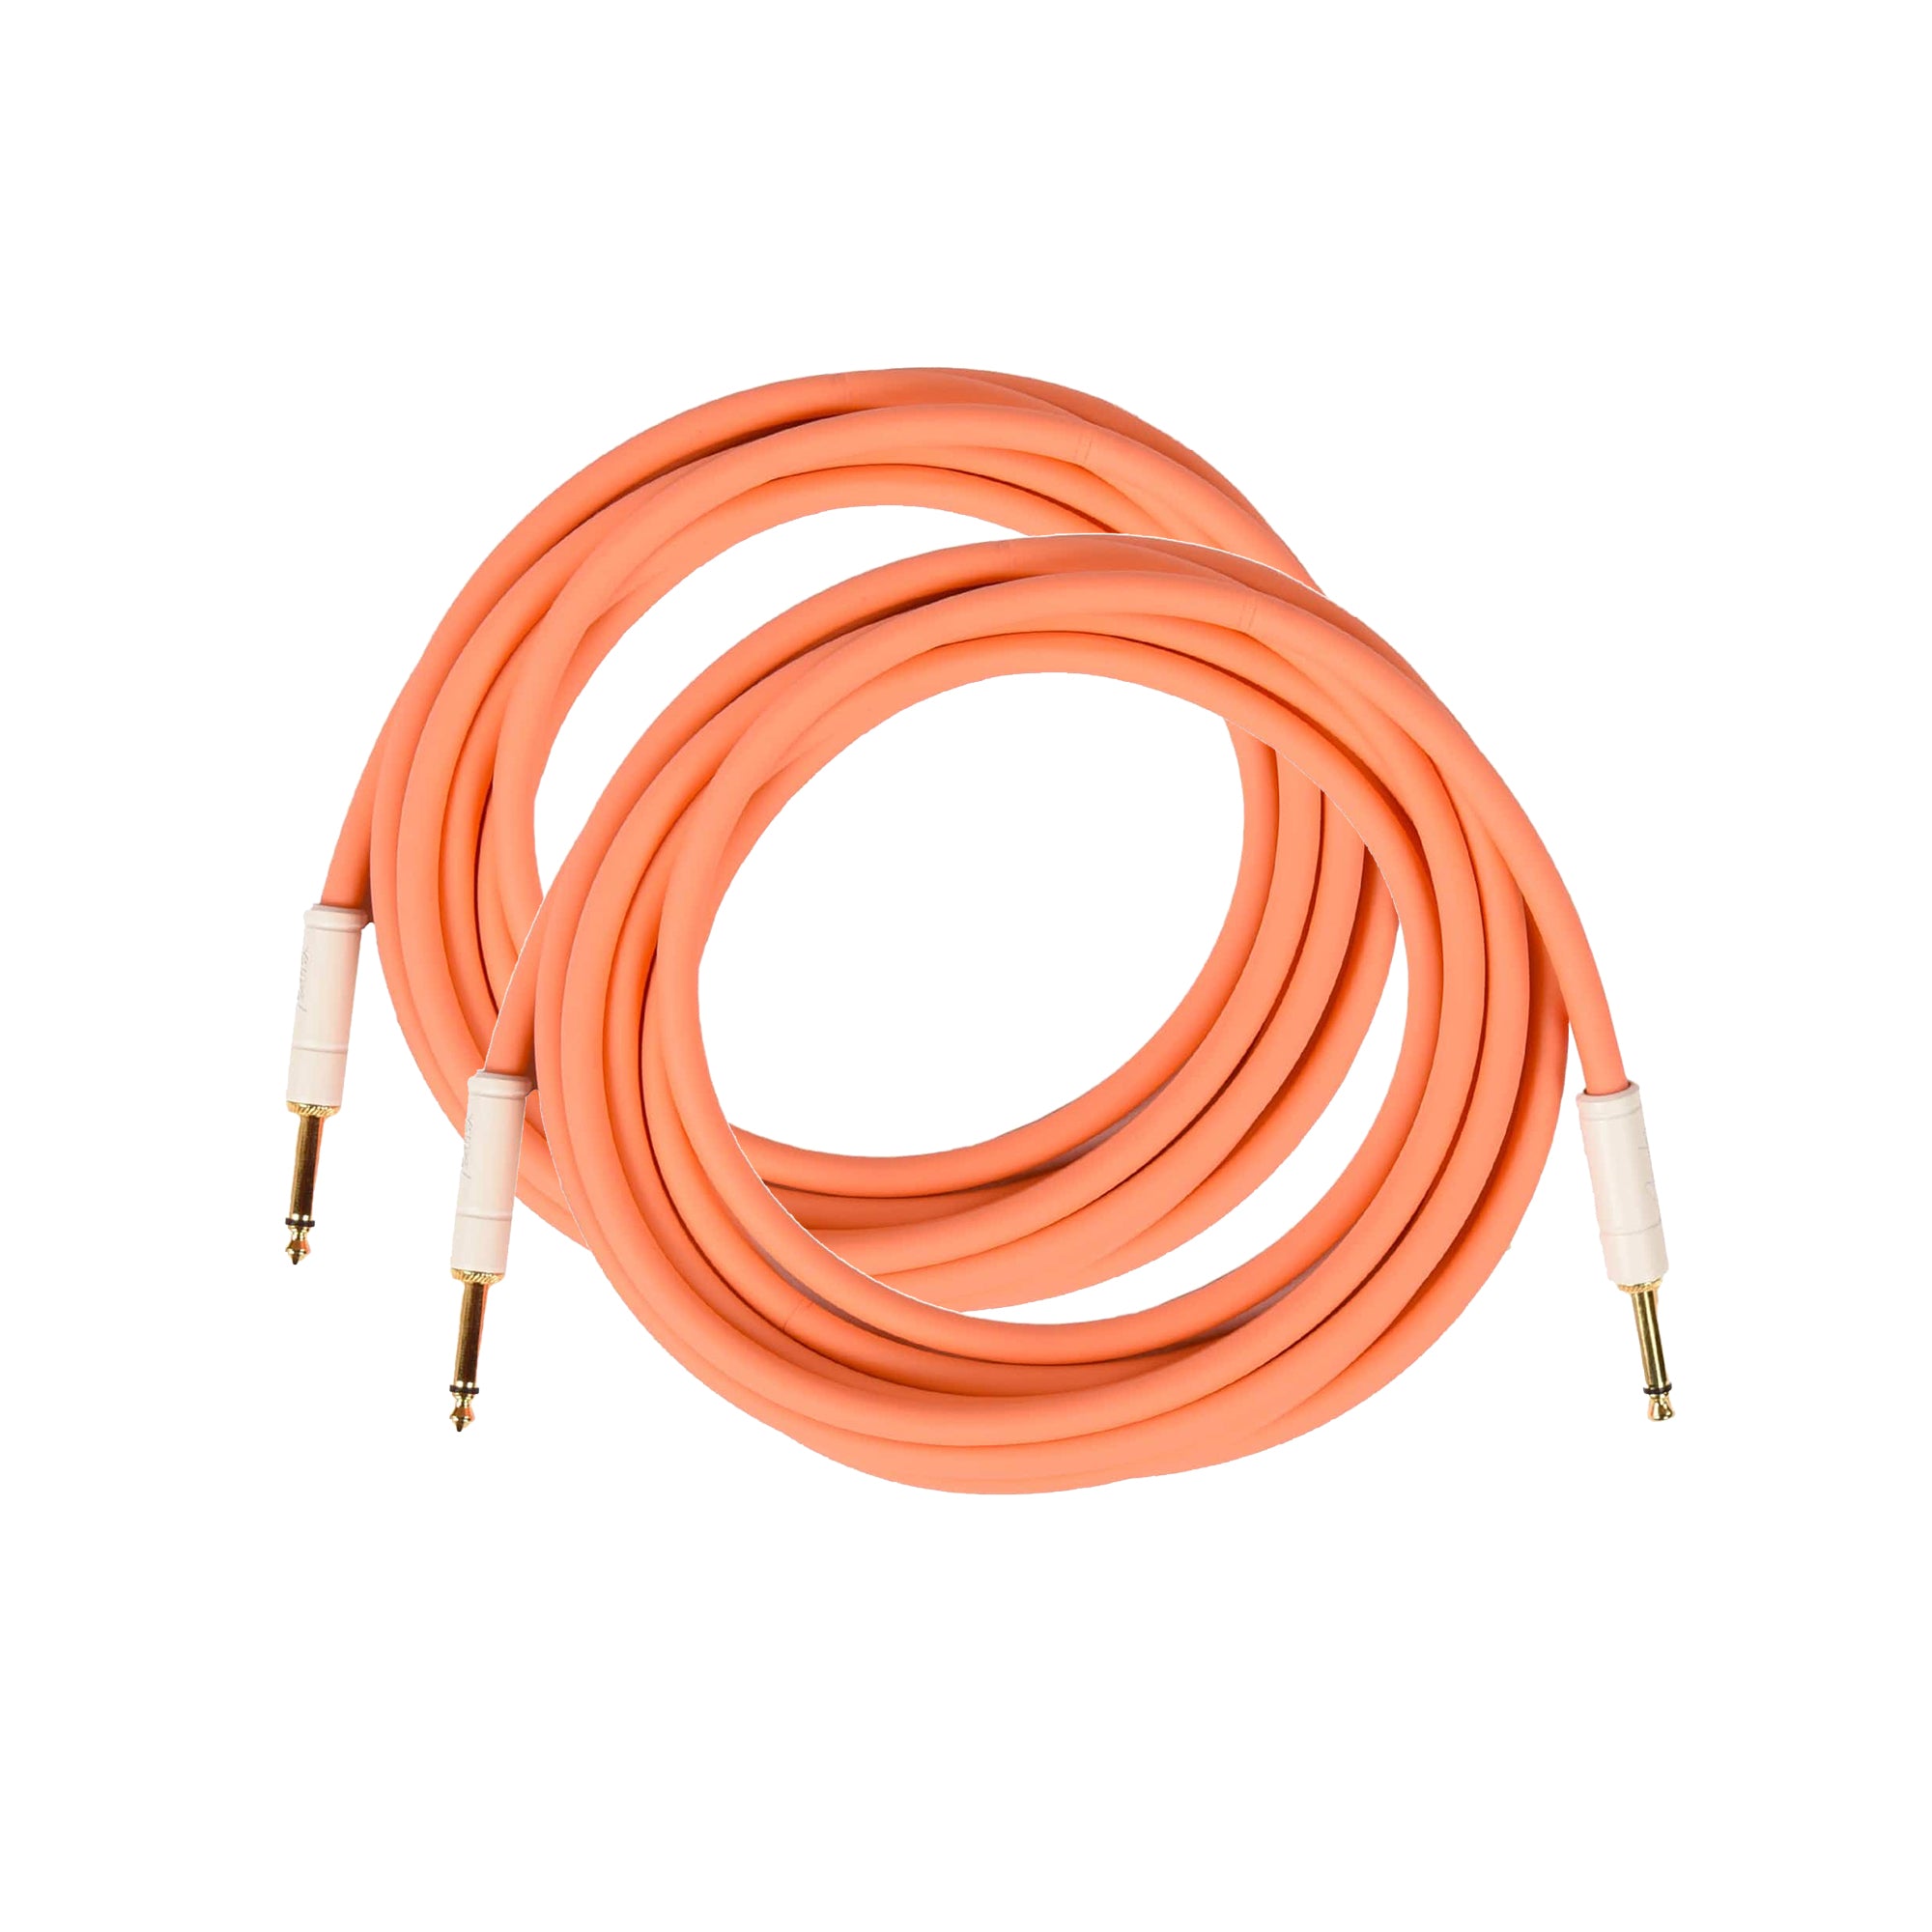 Fender Deluxe Instrument Cable Pacific Peach 18.6' Straight-Straight 2 Pack Bundle